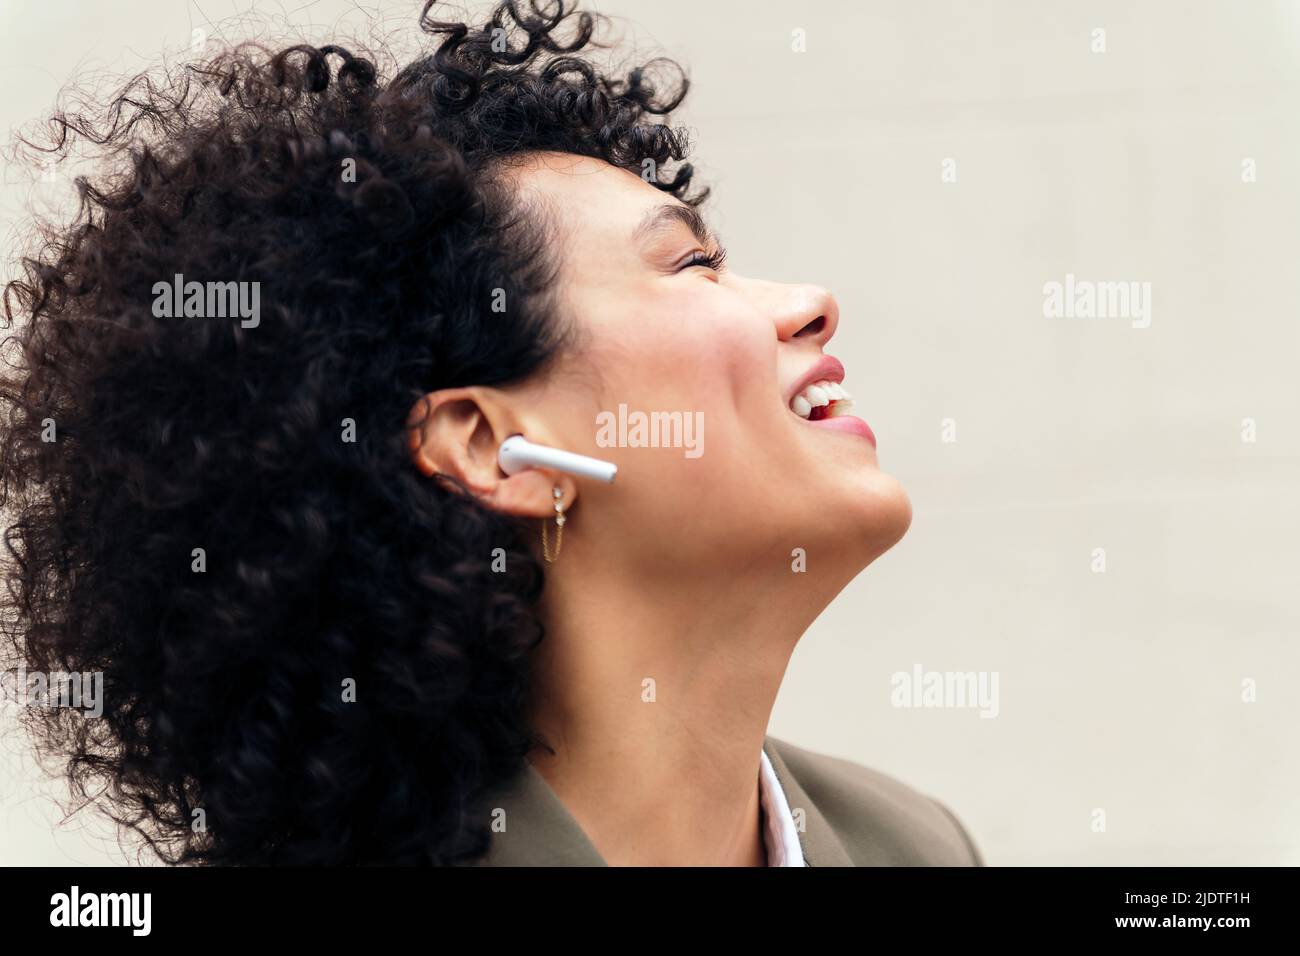 portrait of a happy woman with wireless earphones laughing and enjoying listening to music, concept of youth and technology, copy space for text Stock Photo